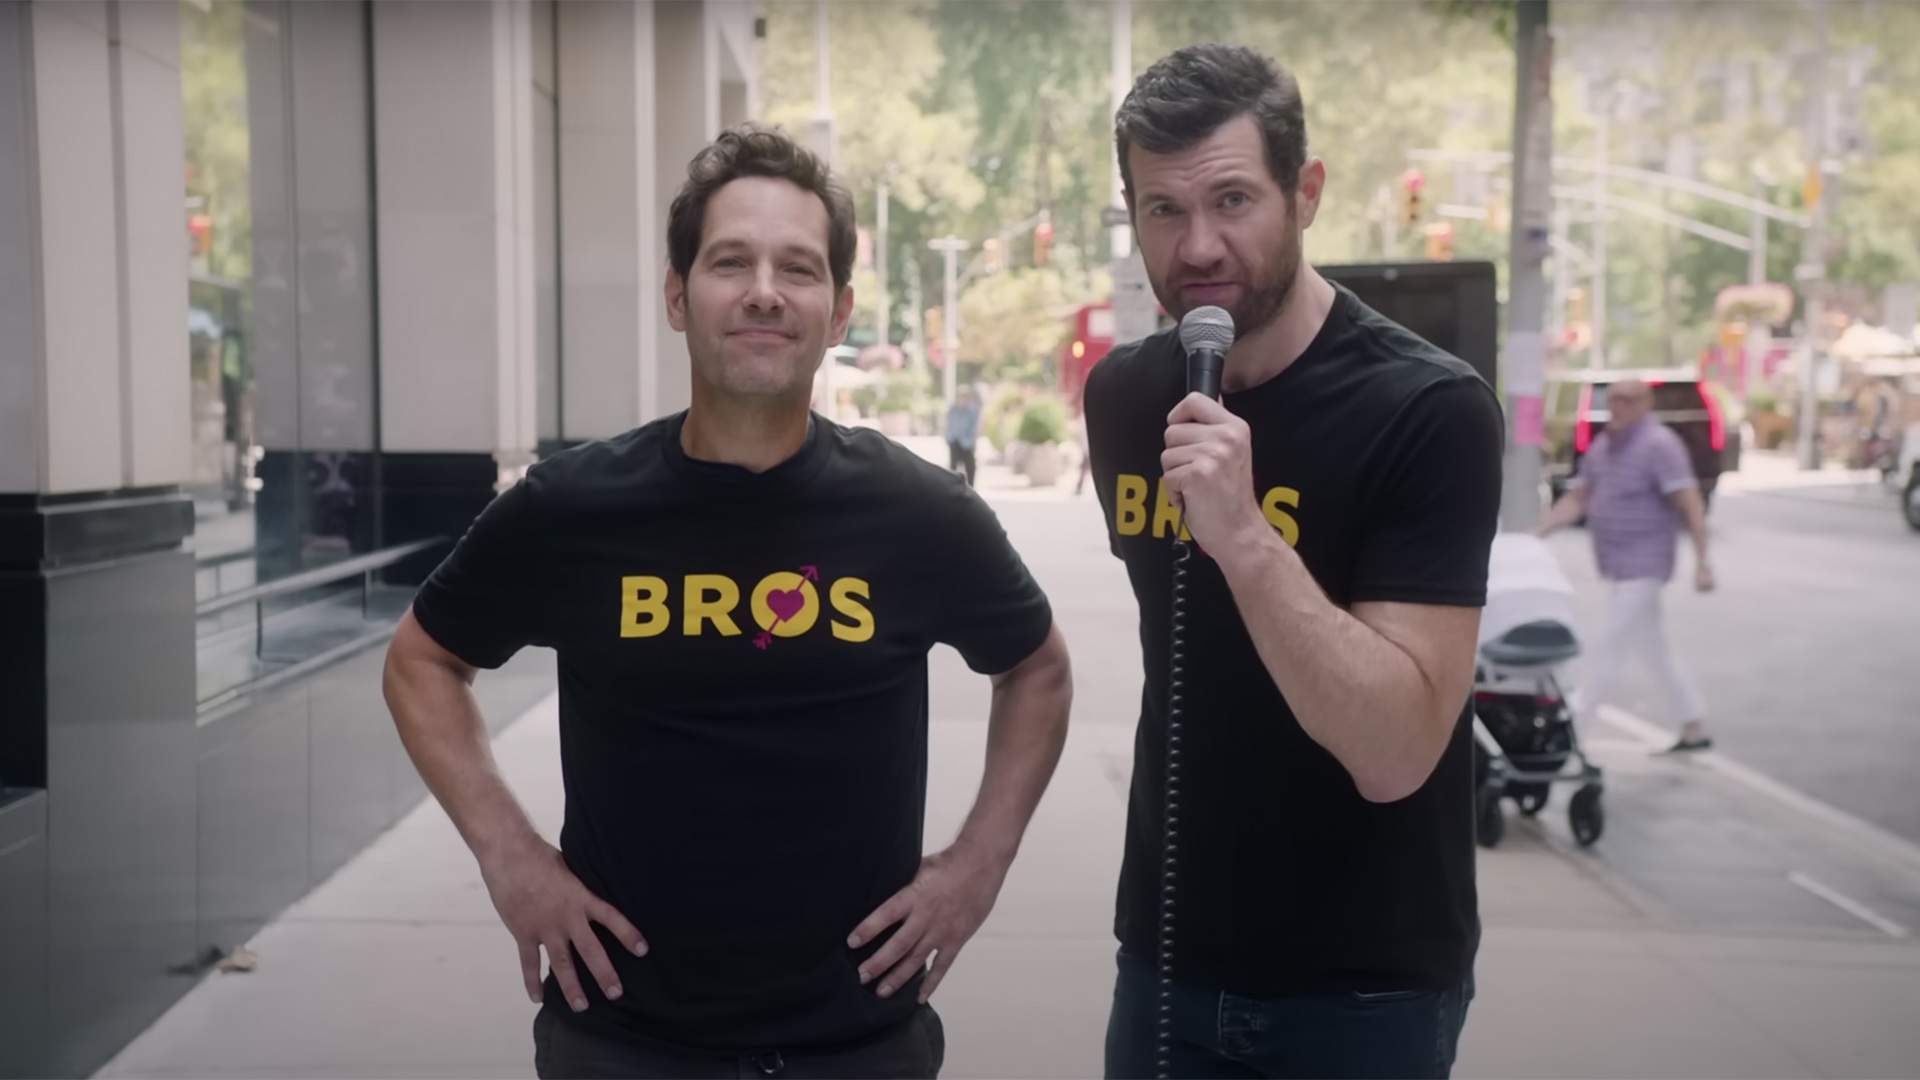 Billy Eichner Has Dropped a New 'Billy on the Street' with Paul Rudd to Get People to See 'Bros'